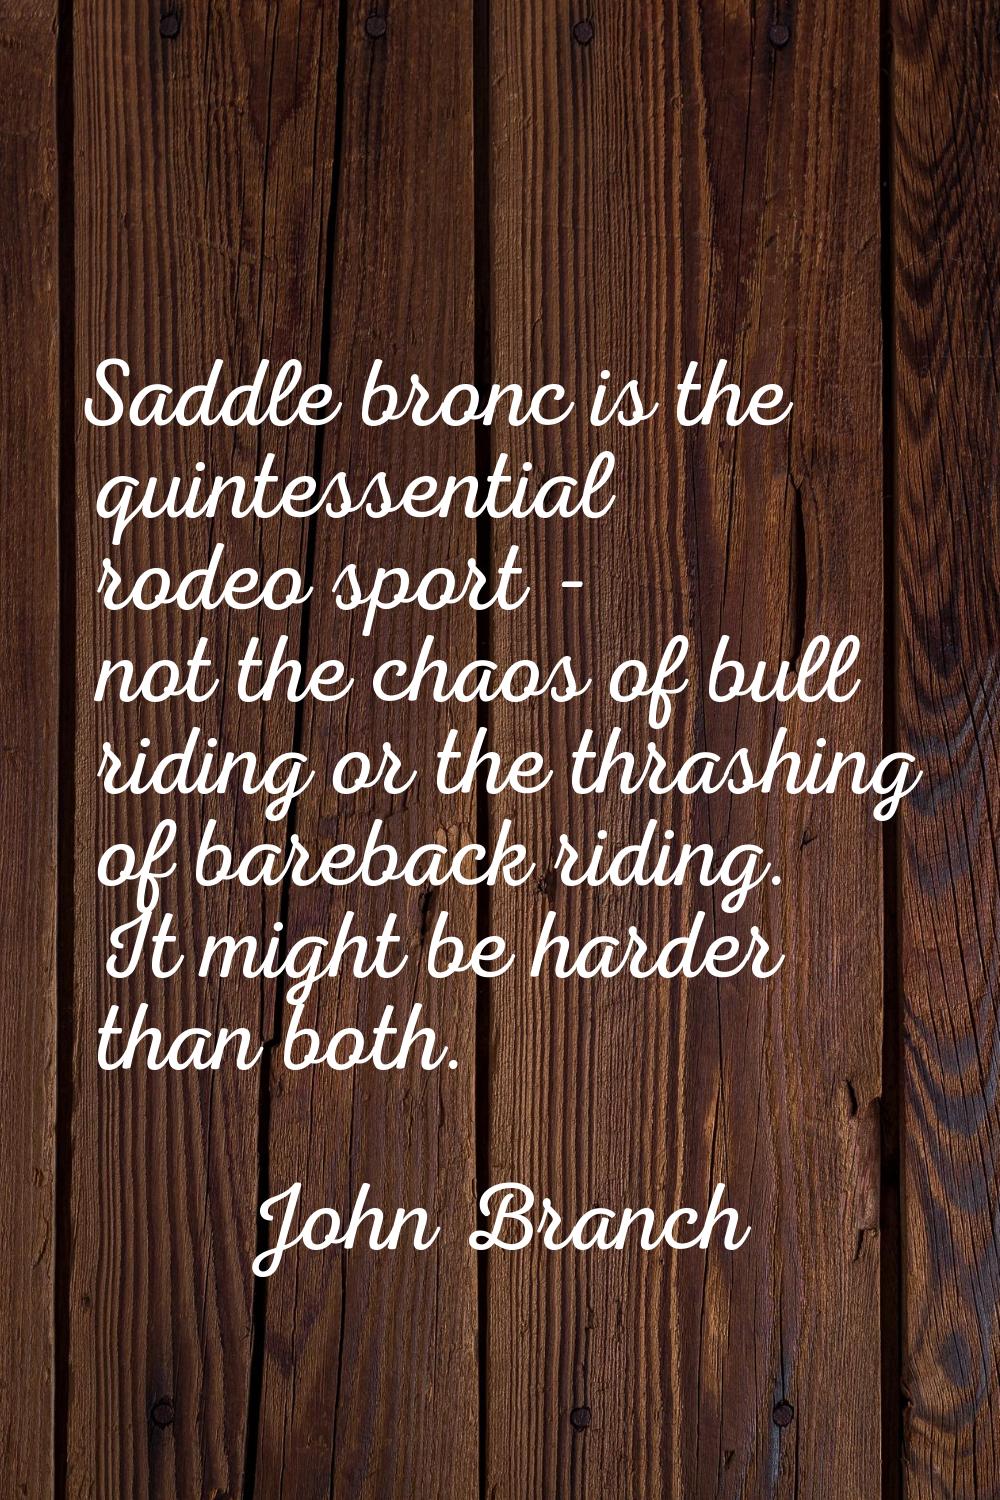 Saddle bronc is the quintessential rodeo sport - not the chaos of bull riding or the thrashing of b